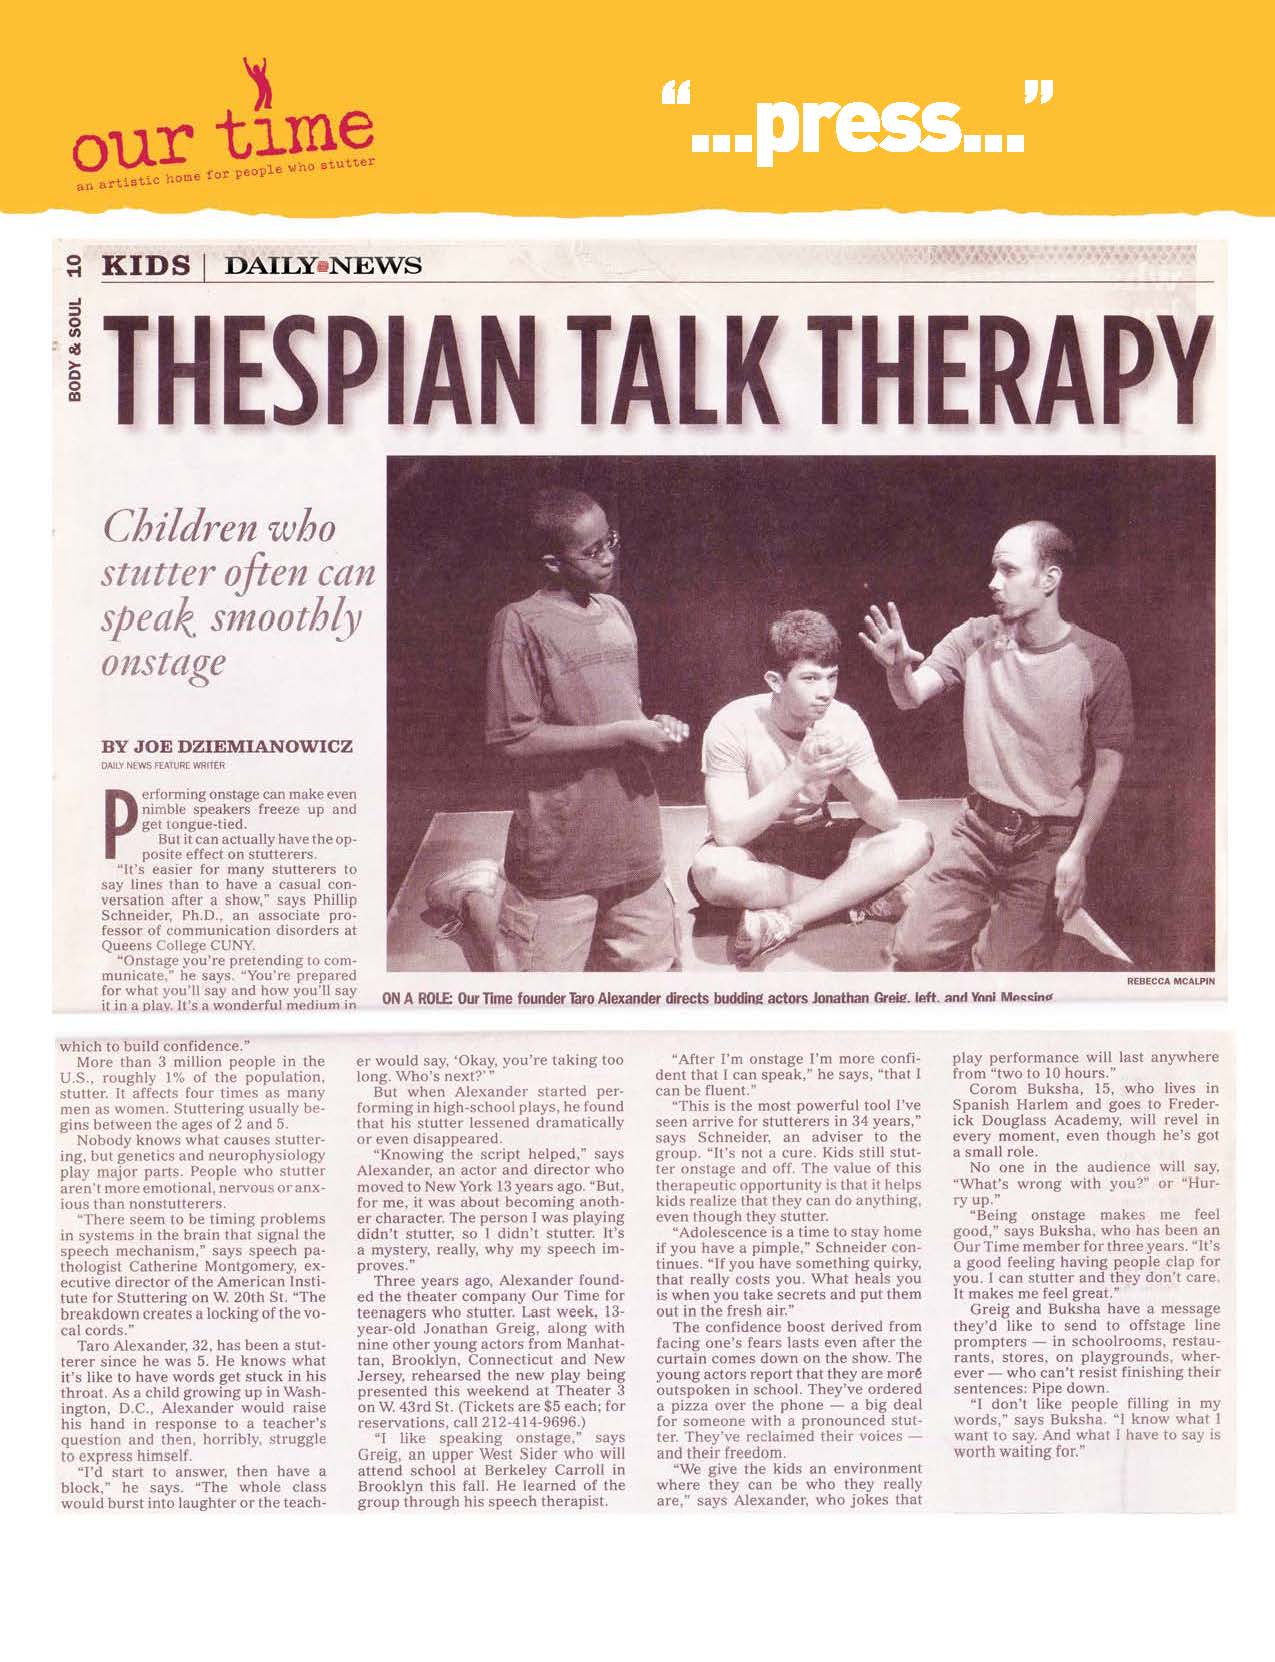 Thespian Talk Therapy